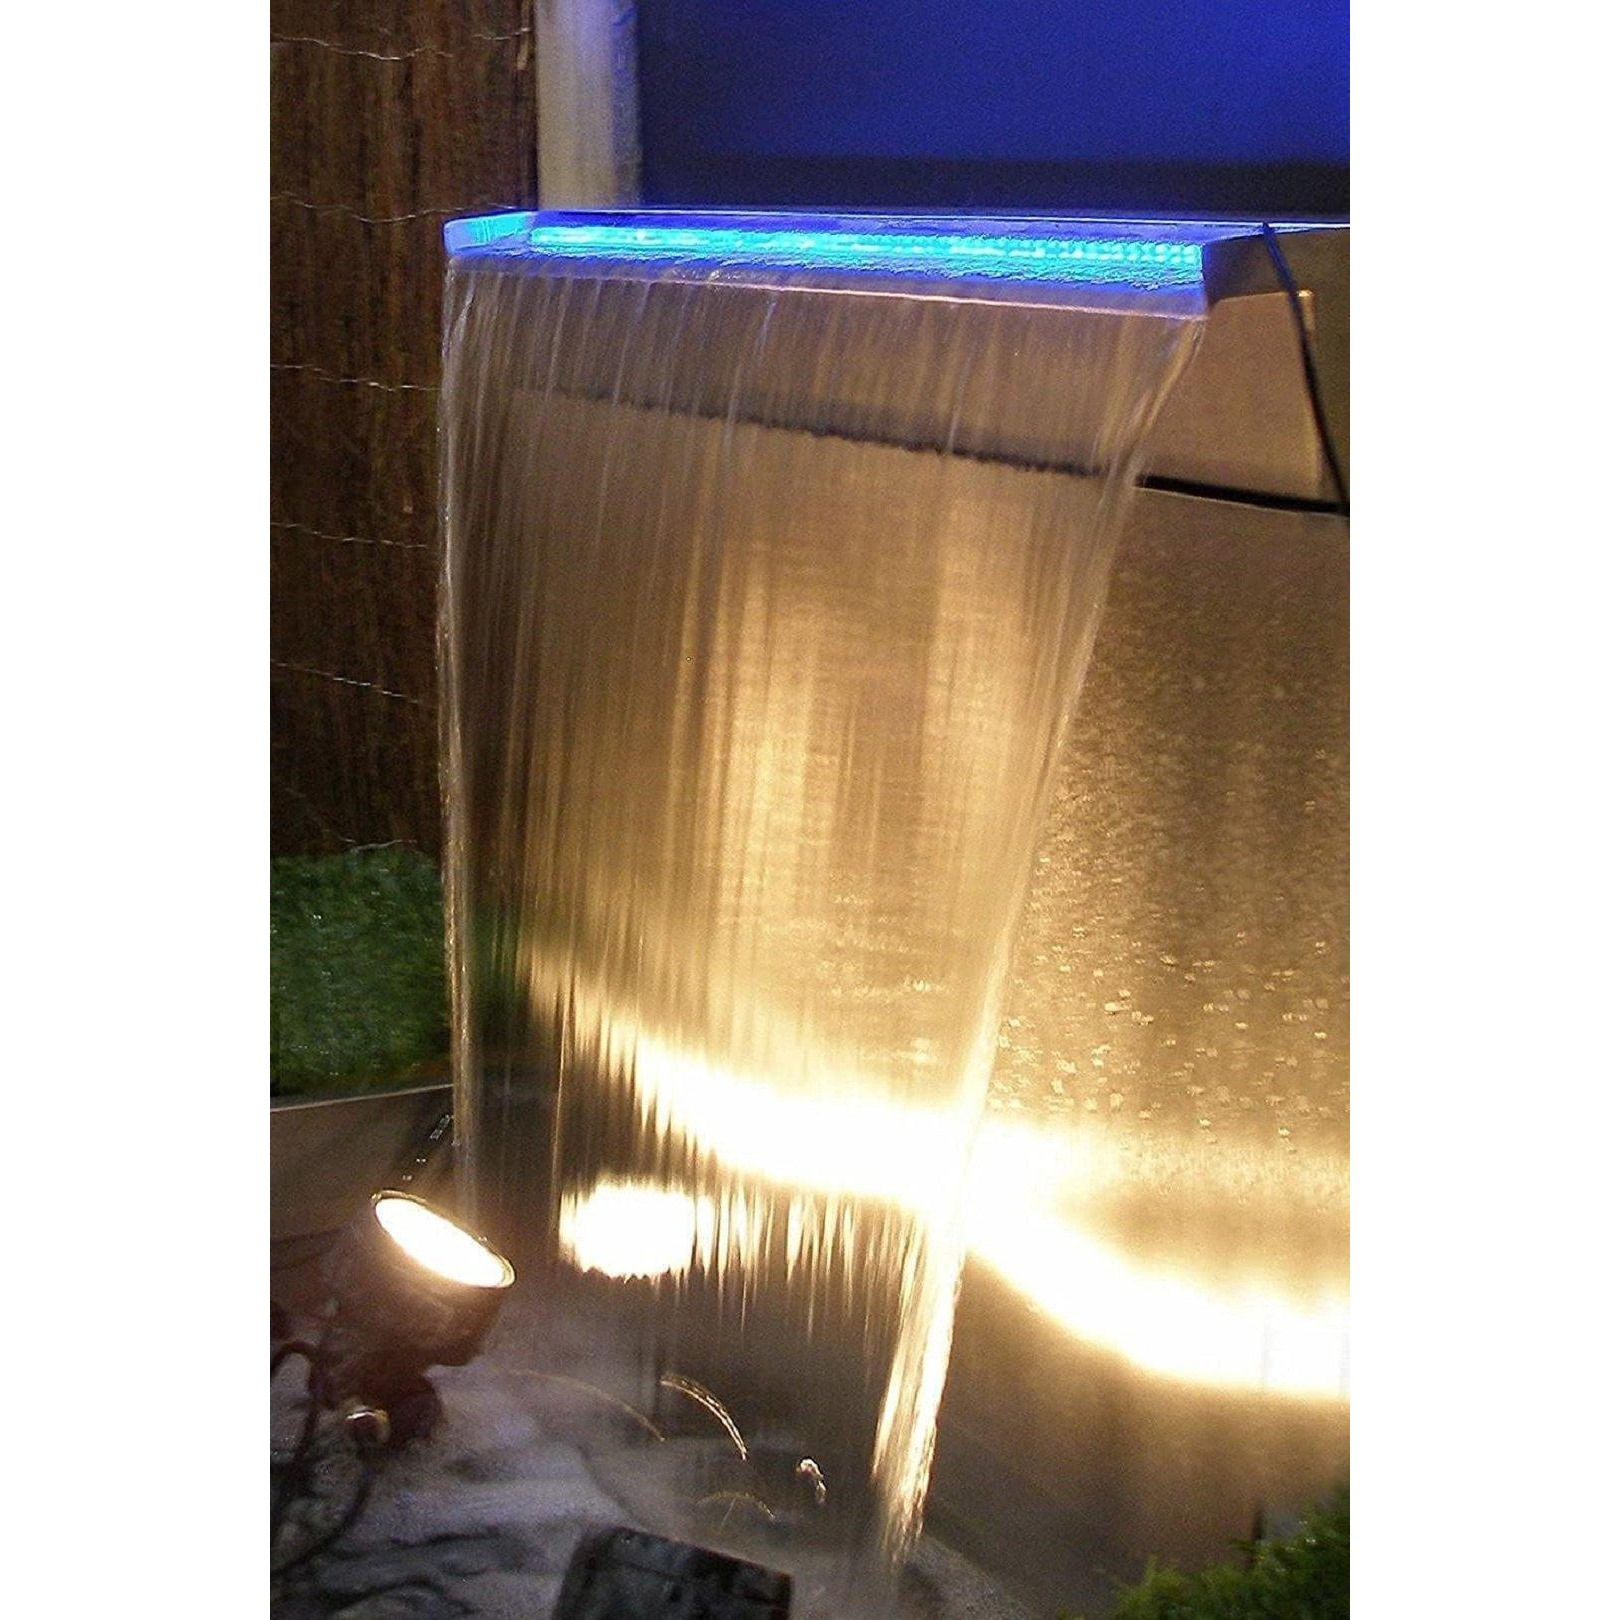 Stainless Steel Waterfall Cascade Rear Supply 60cm - image 1